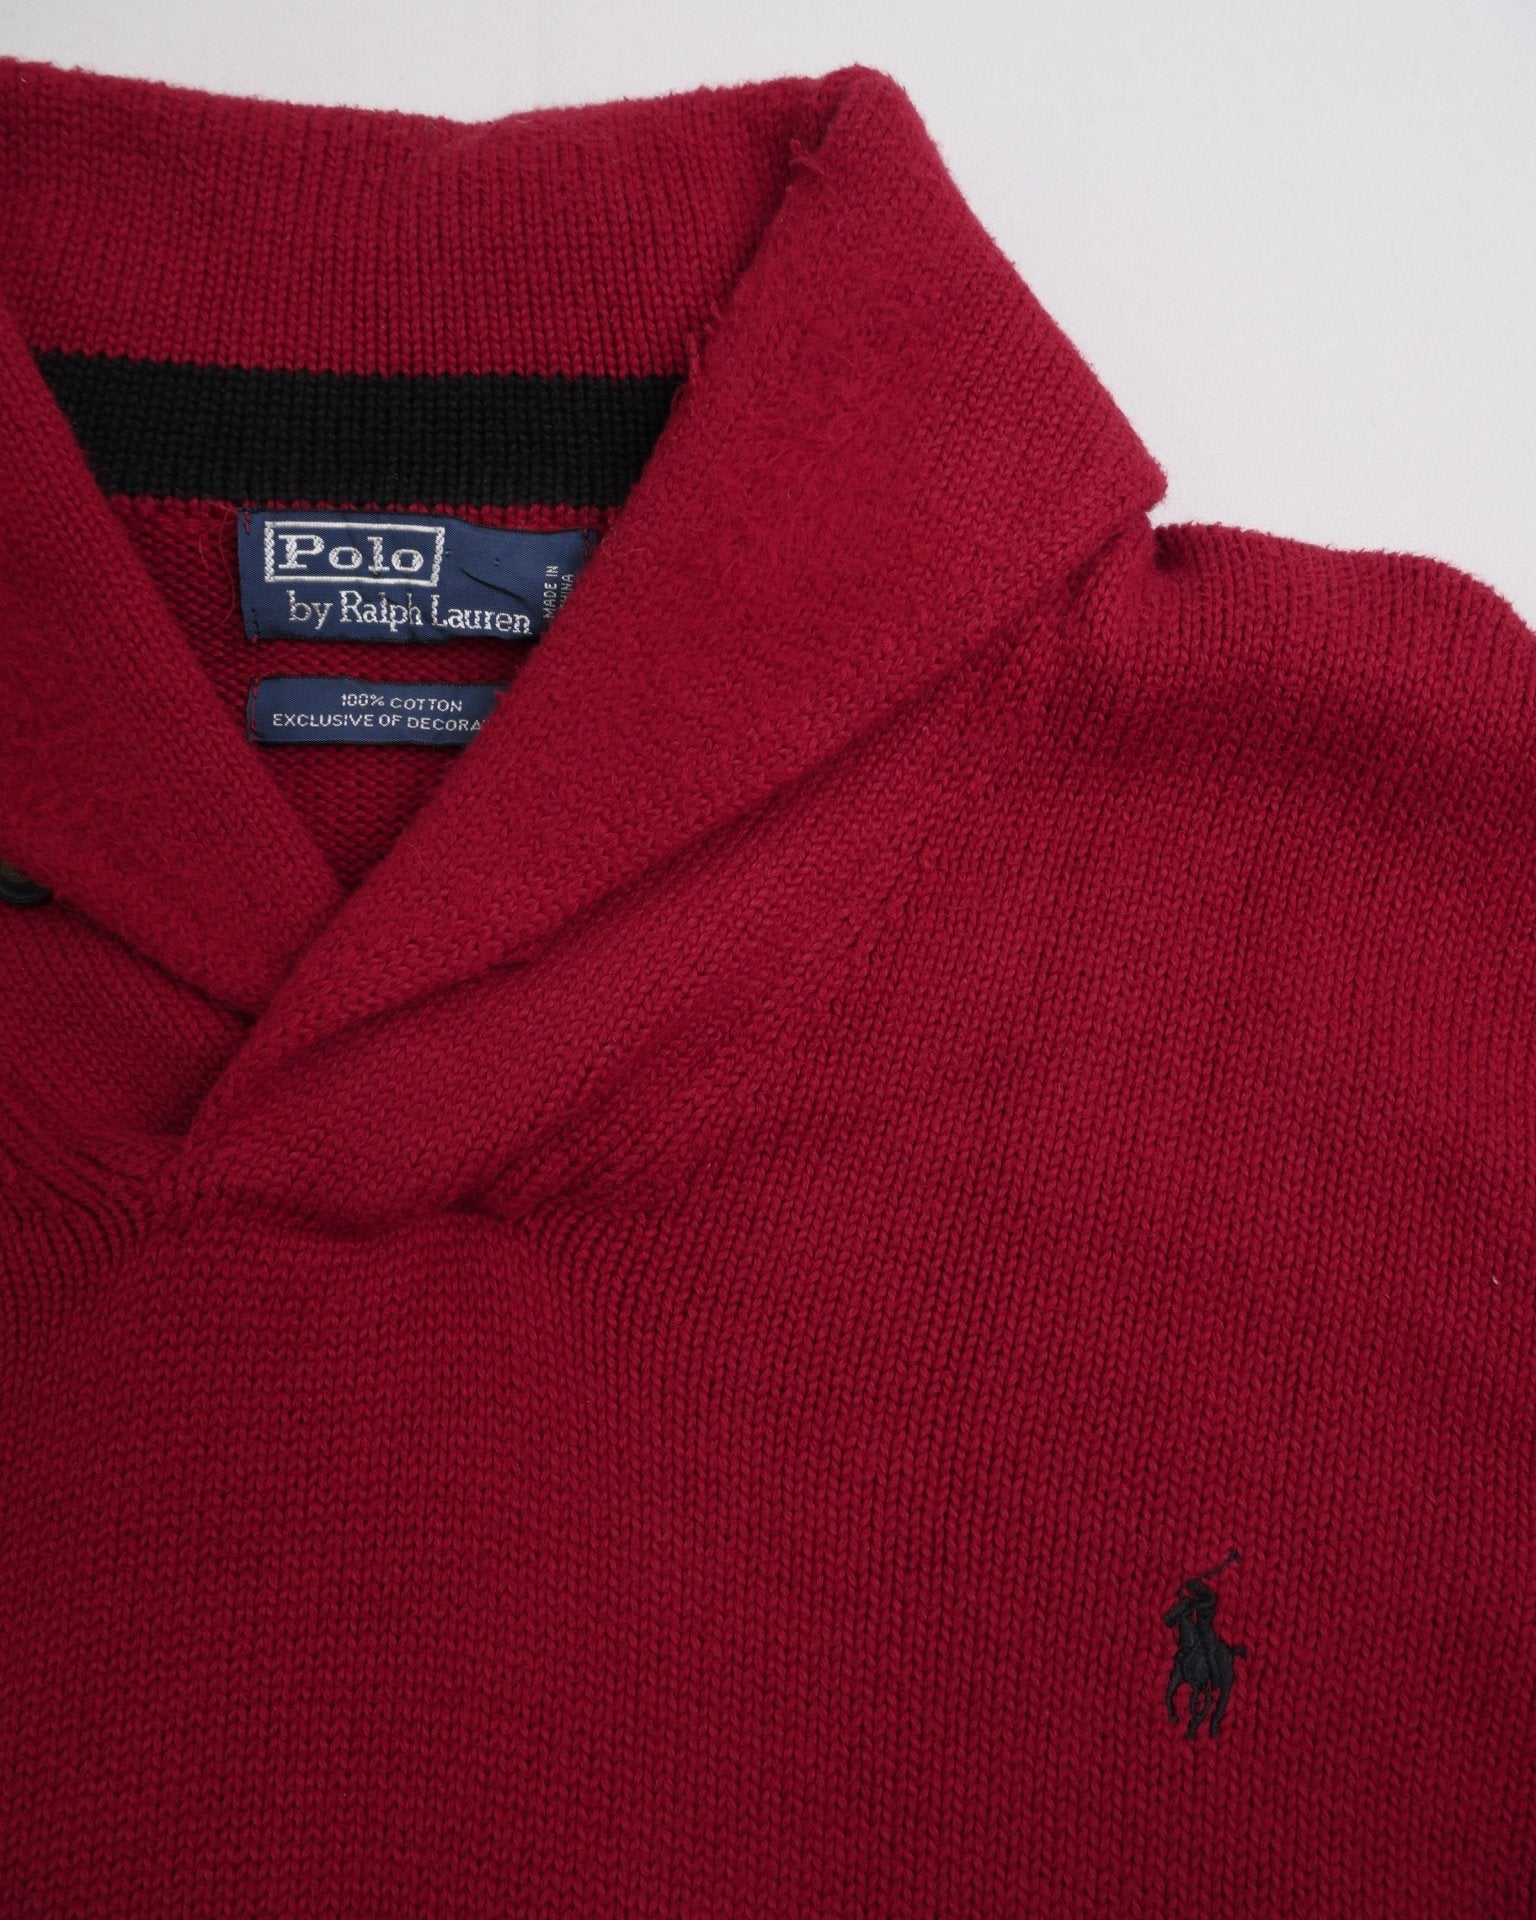 Polo Ralph Lauren embroidered Logo Half Buttoned Sweater - Peeces